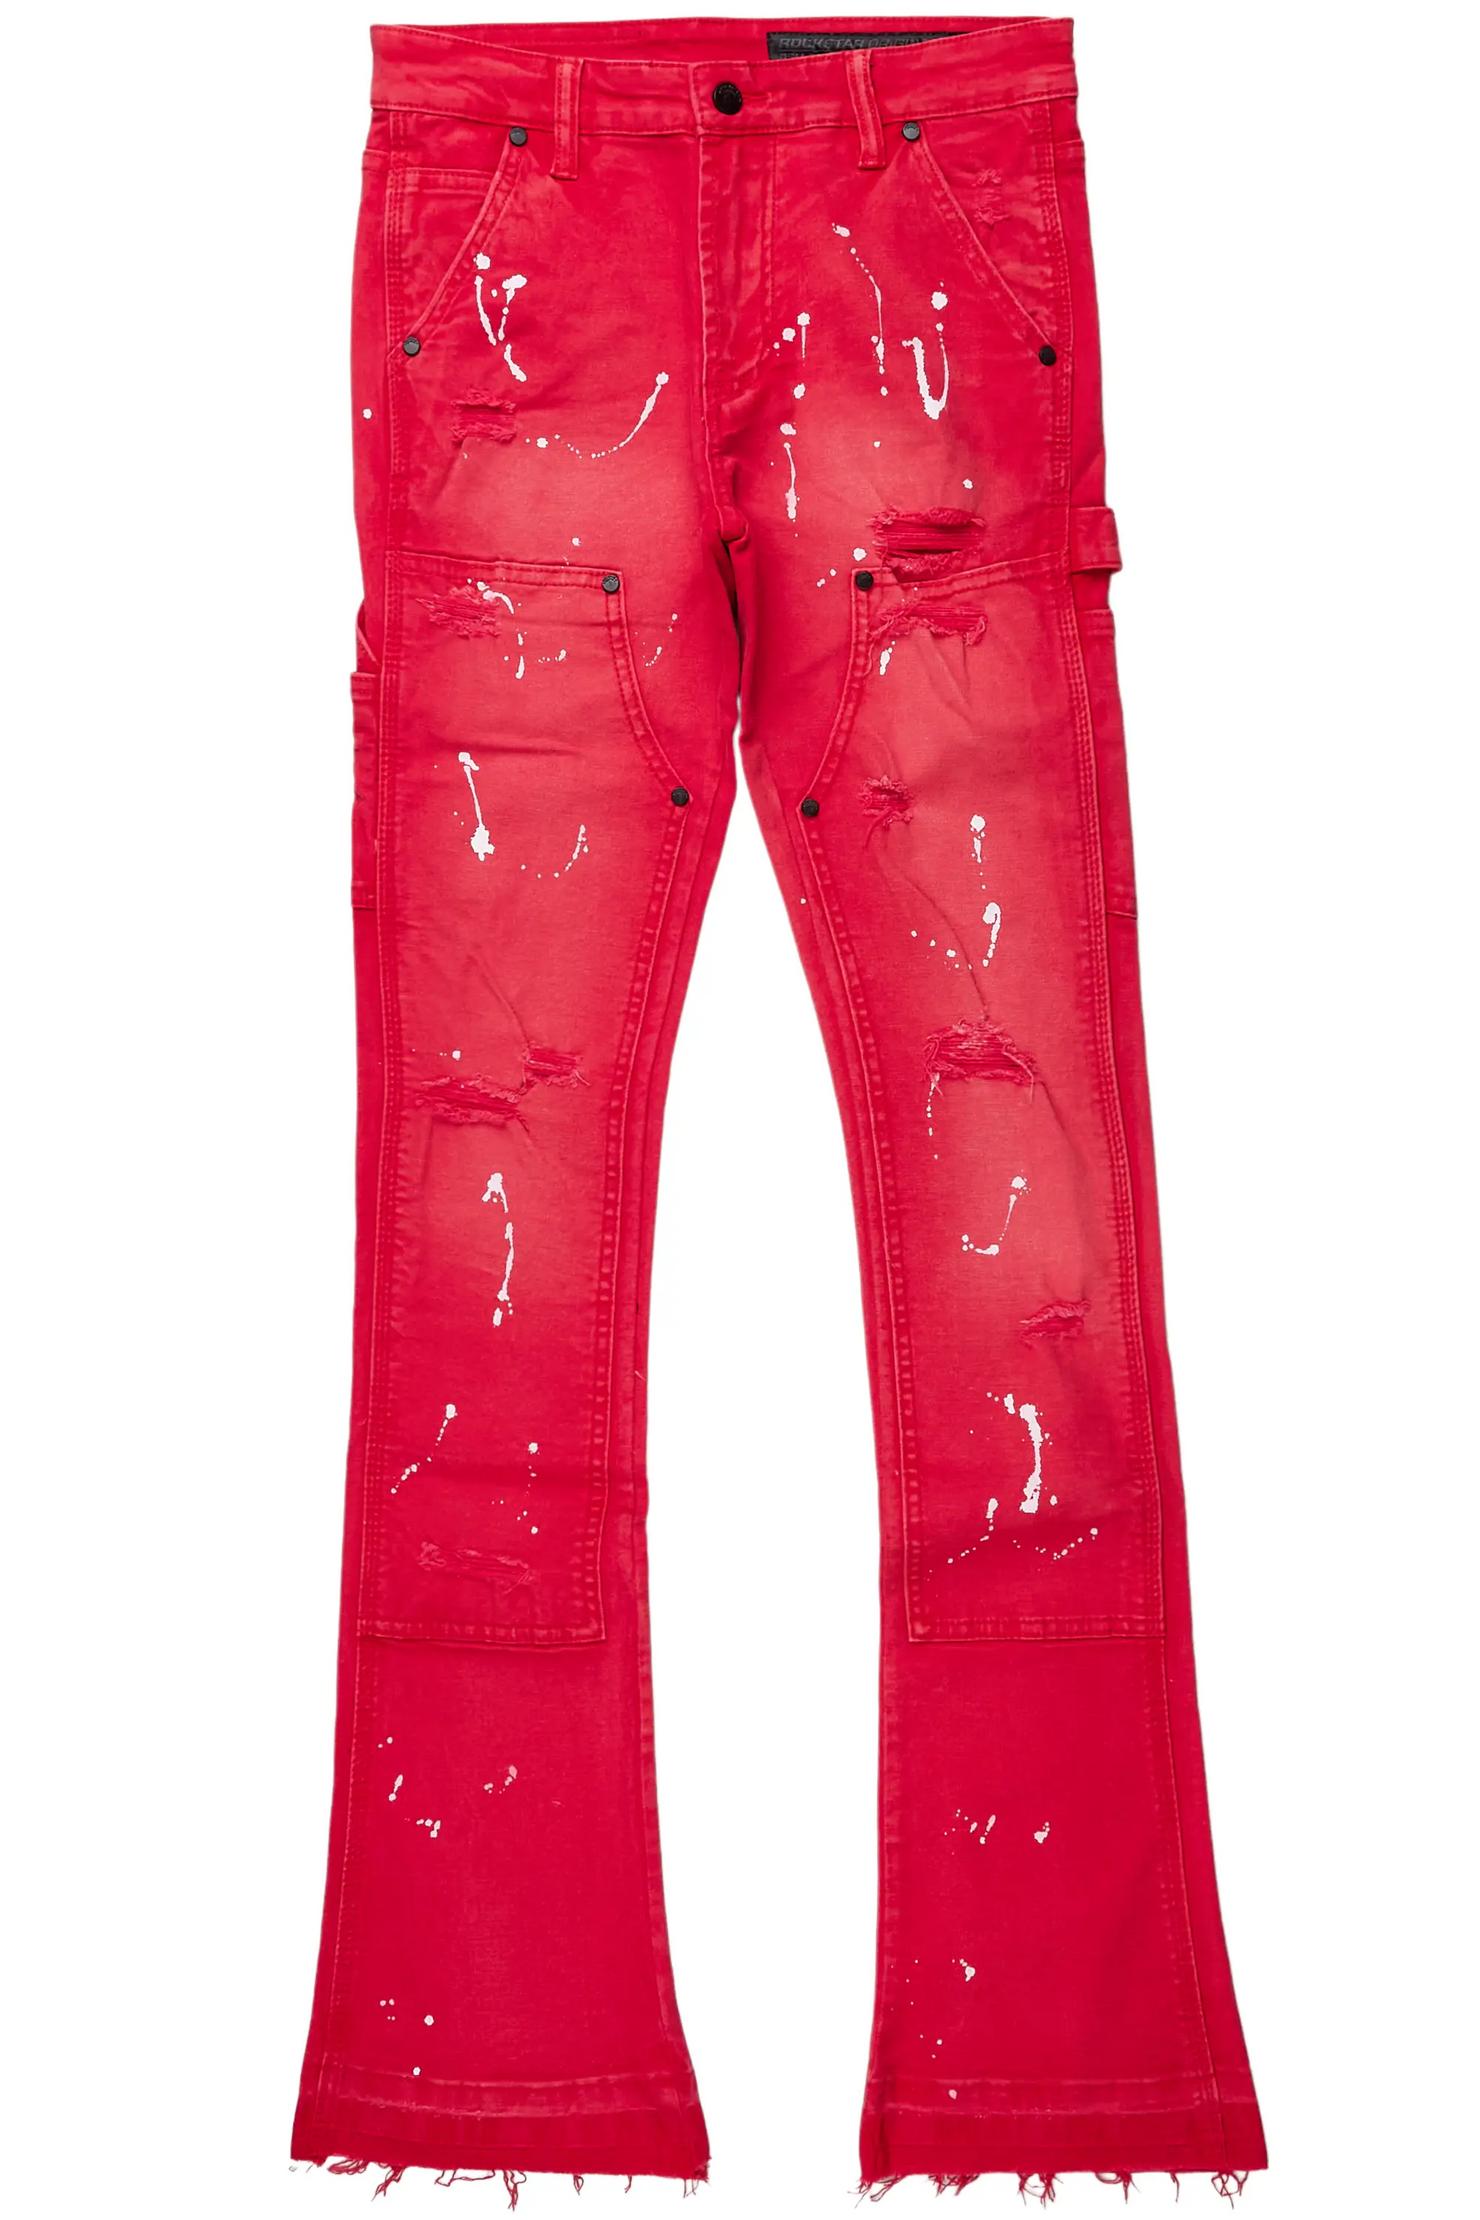 Thorton Red Stacked Flare Jean